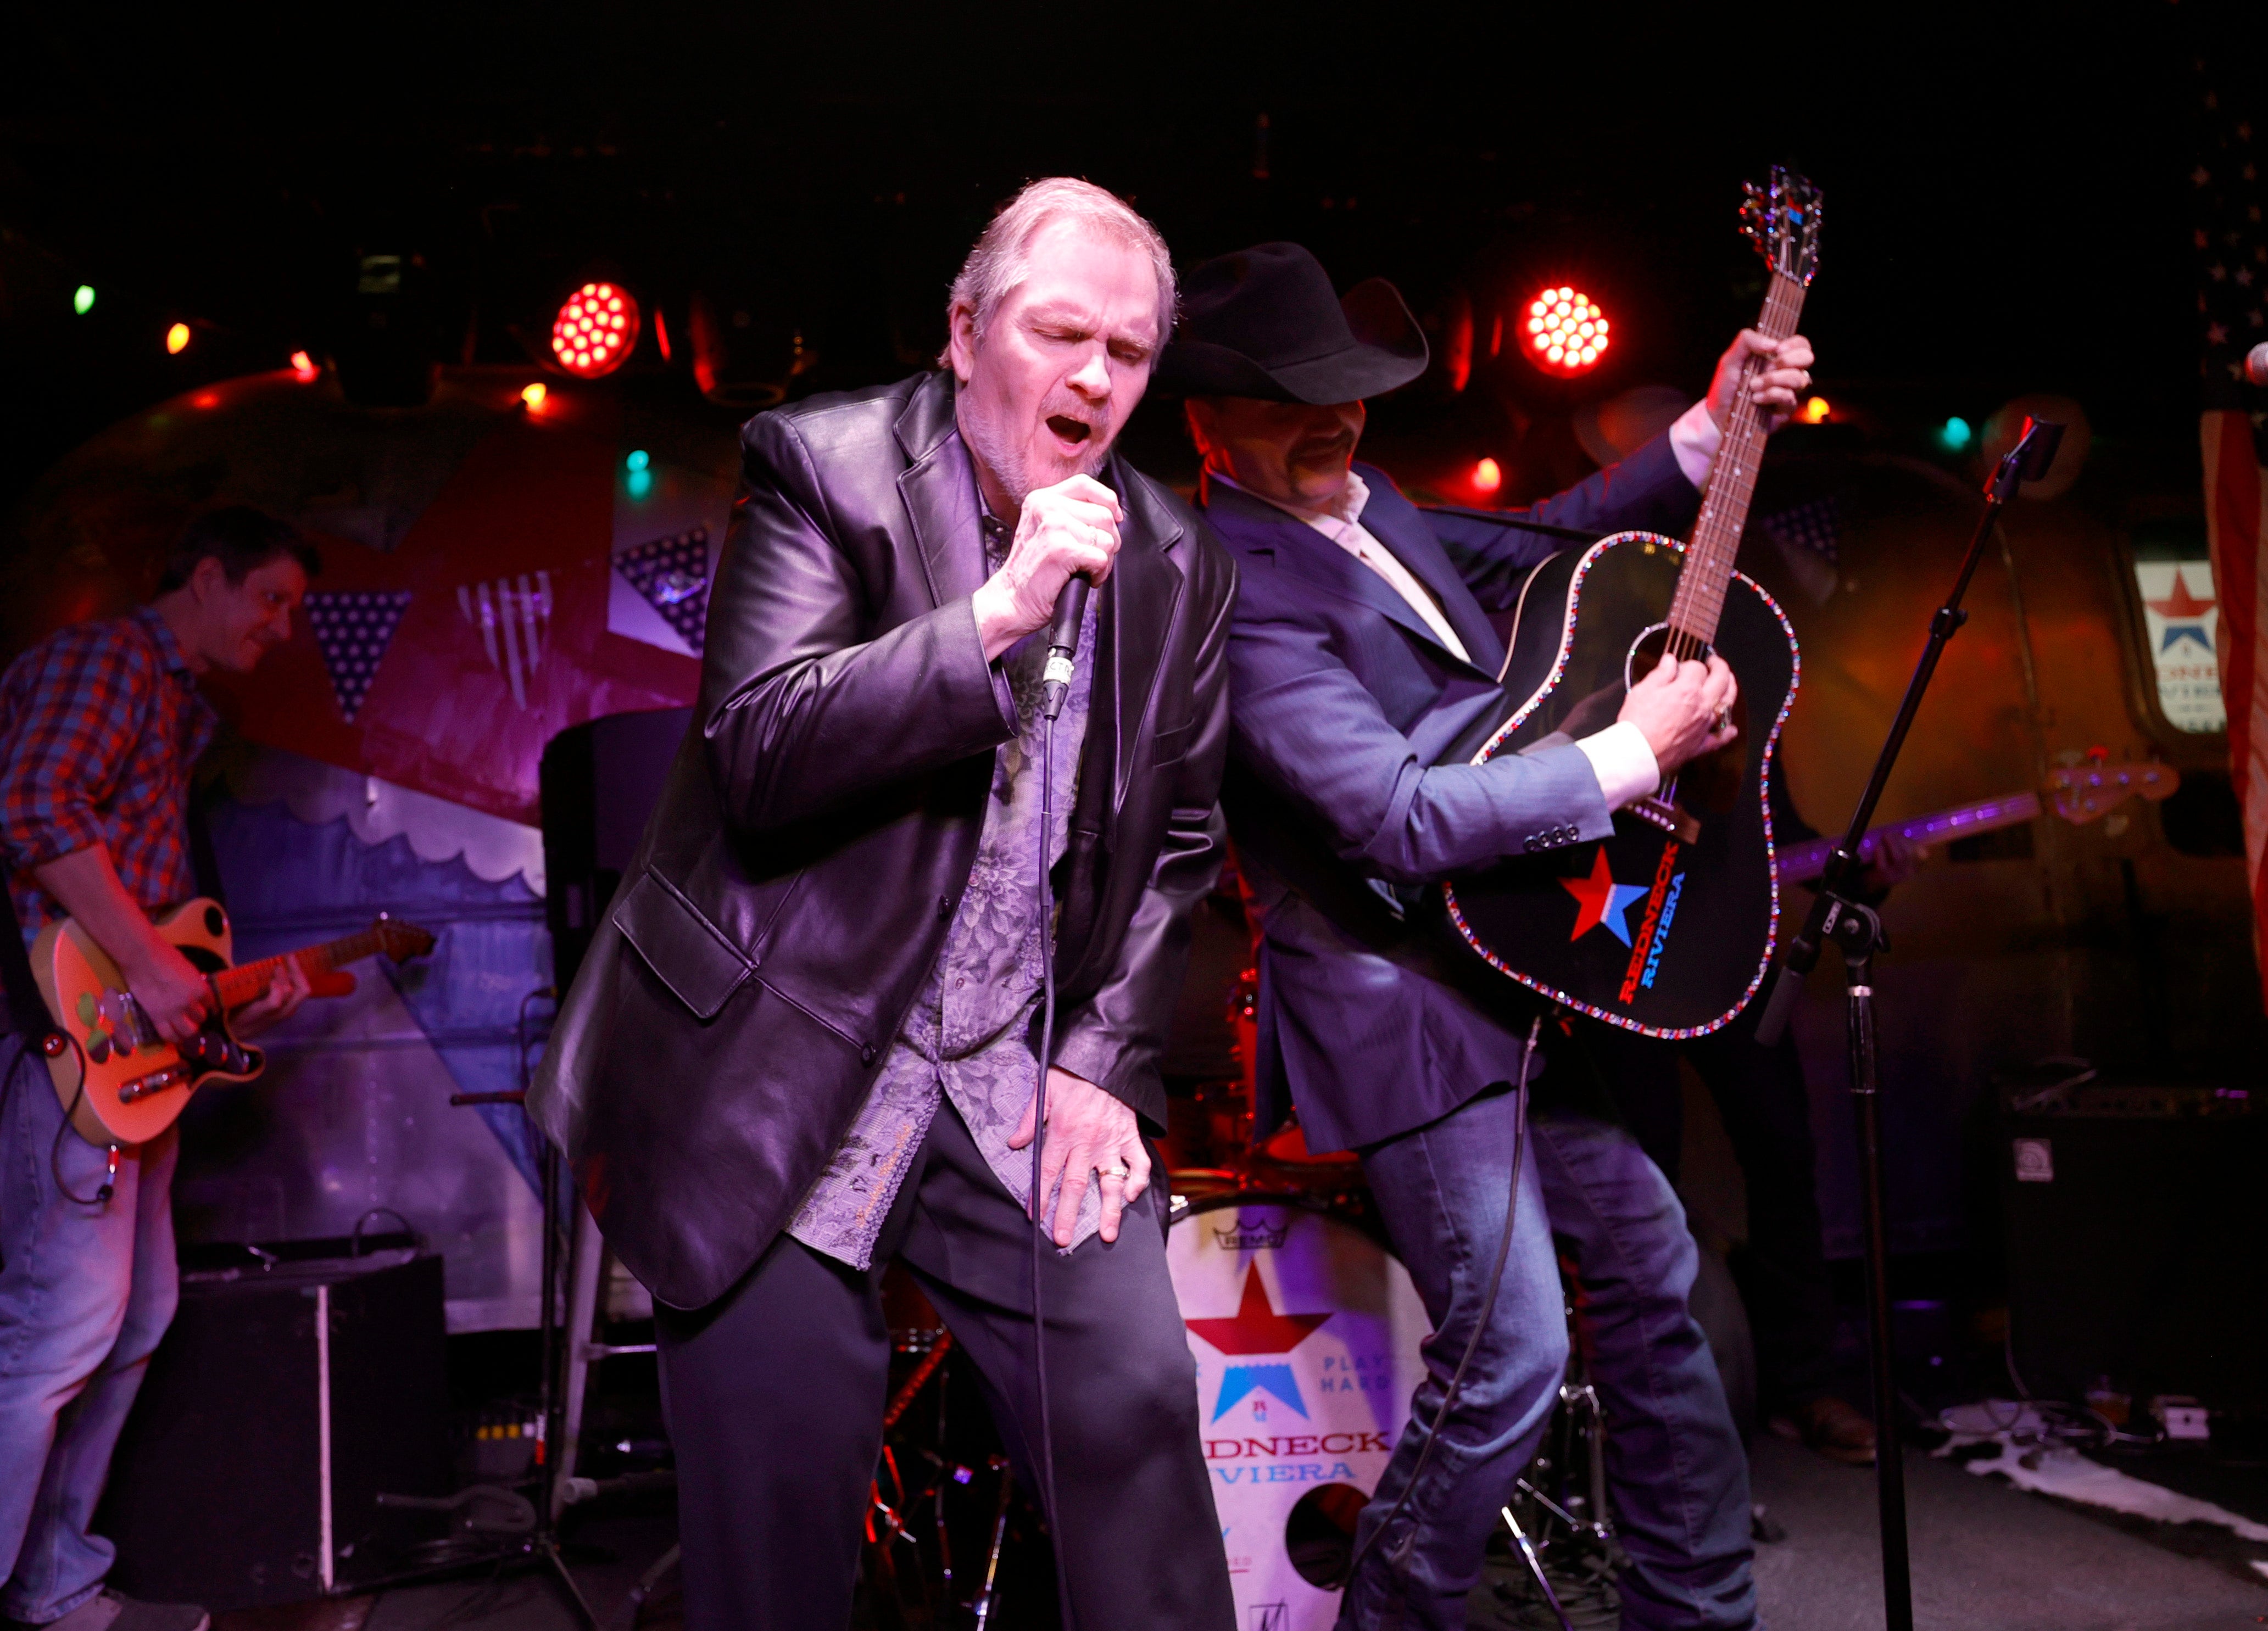 Duetting with country artist John Rich at Redneck Riviera Nashville on 27 March 2021